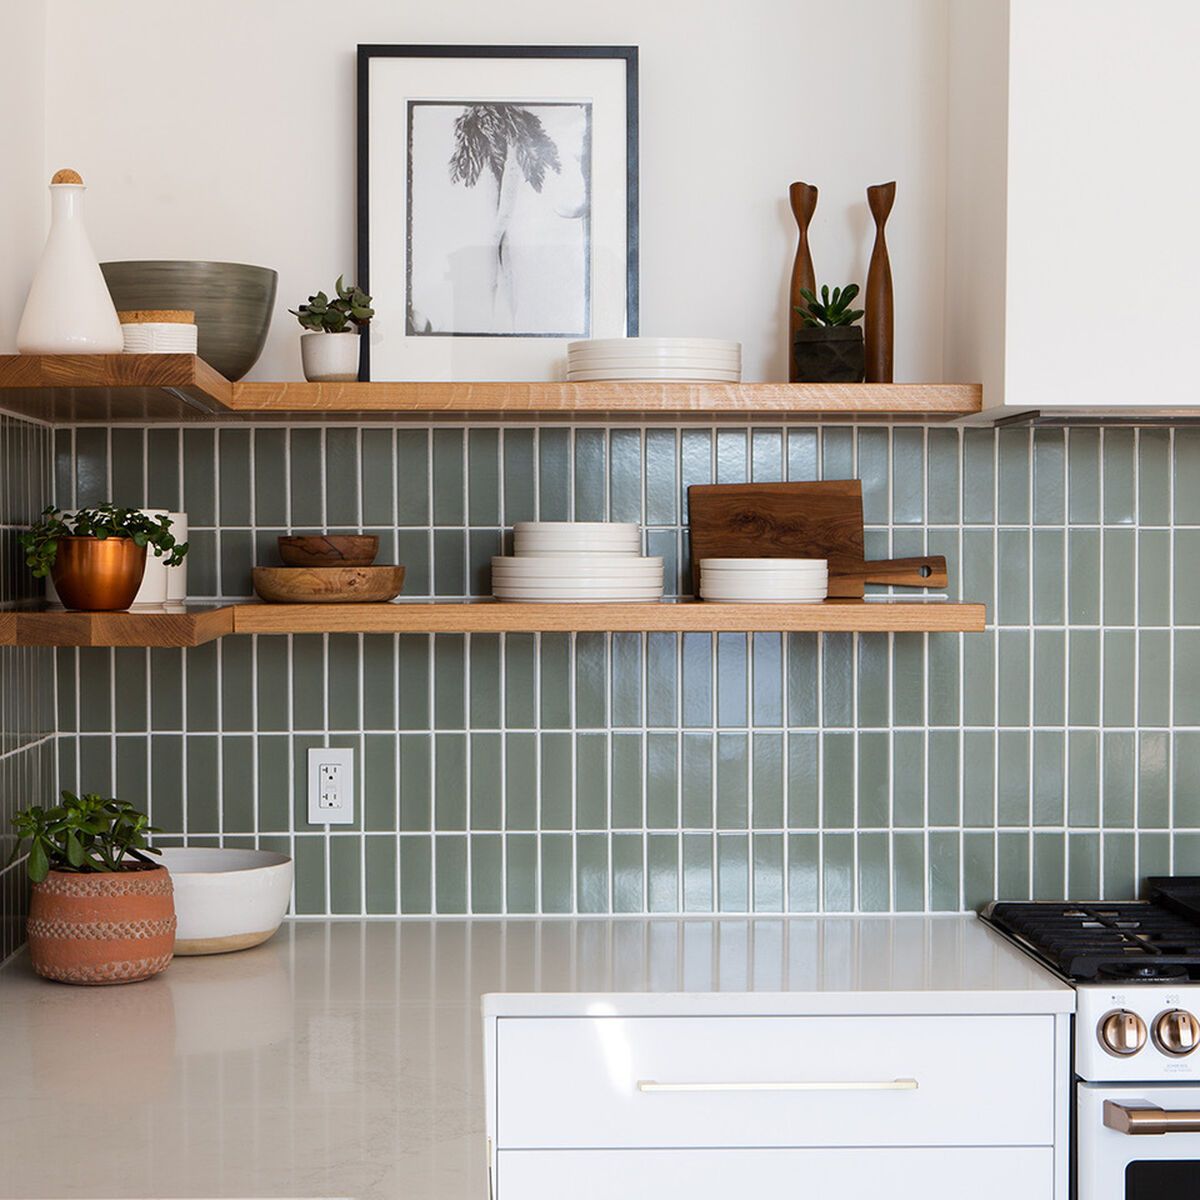 How to Choose the Right Backsplash for
Your Kitchen